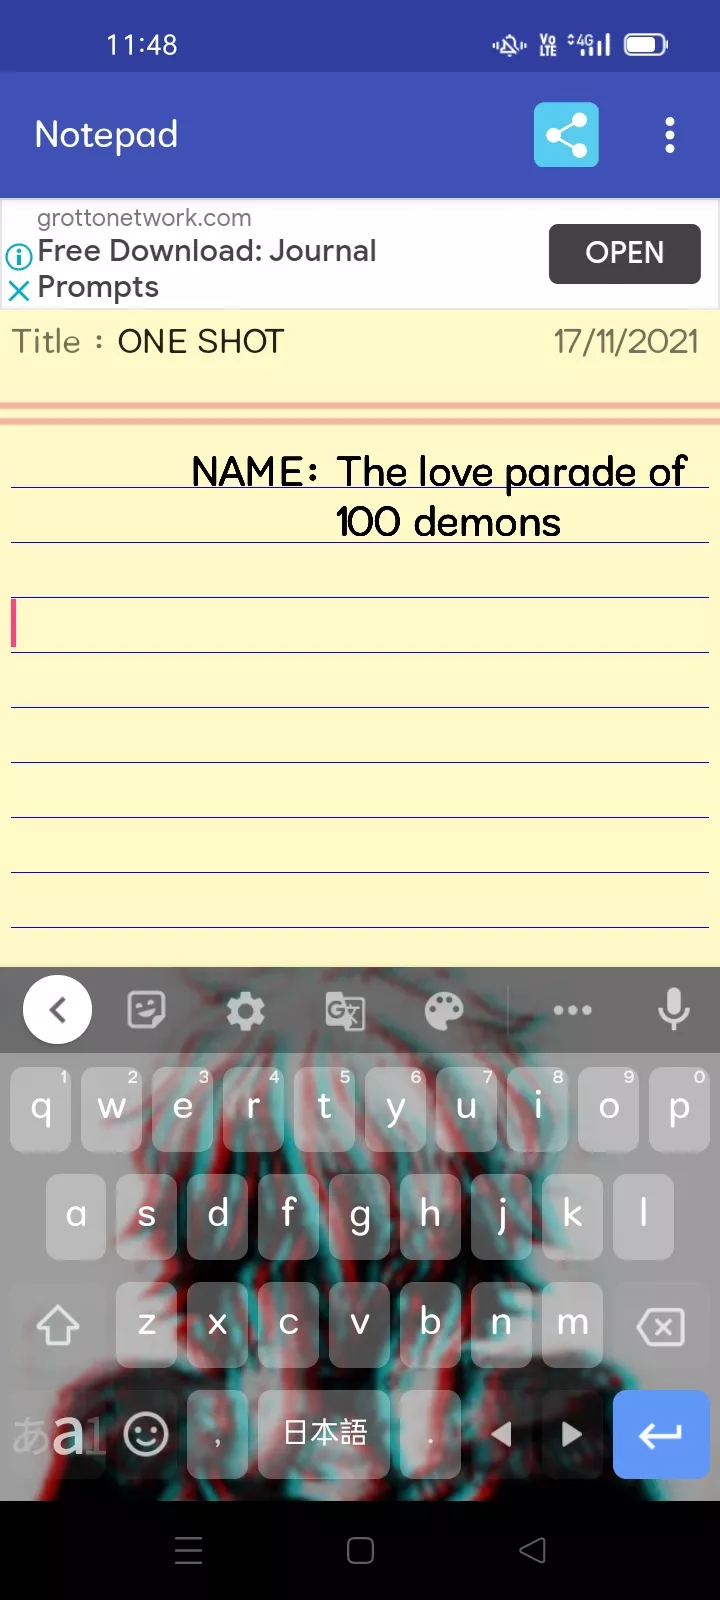 The love parade of 100 demons 